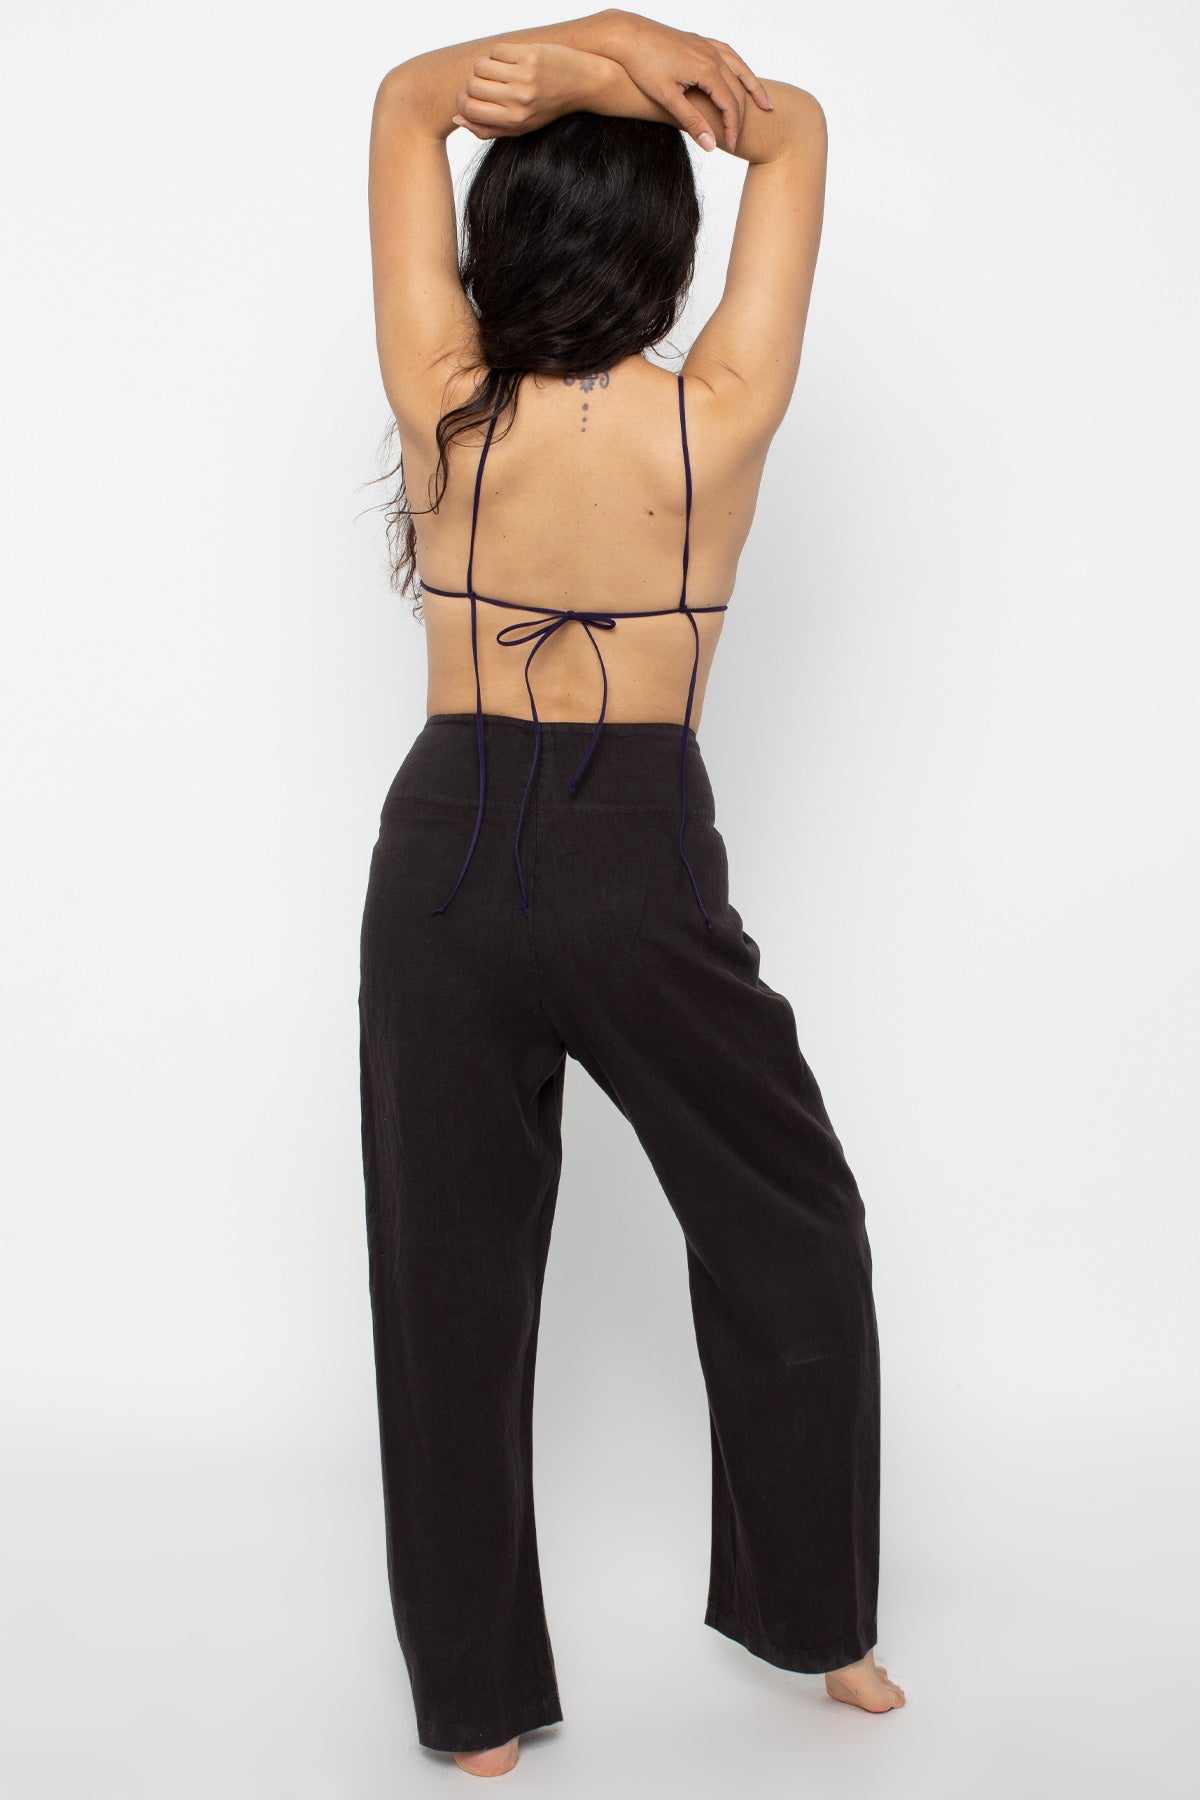 AMERICAN APPAREL LOOP TERRY TOWELLING HALTER TRIANGLE LOUNGE